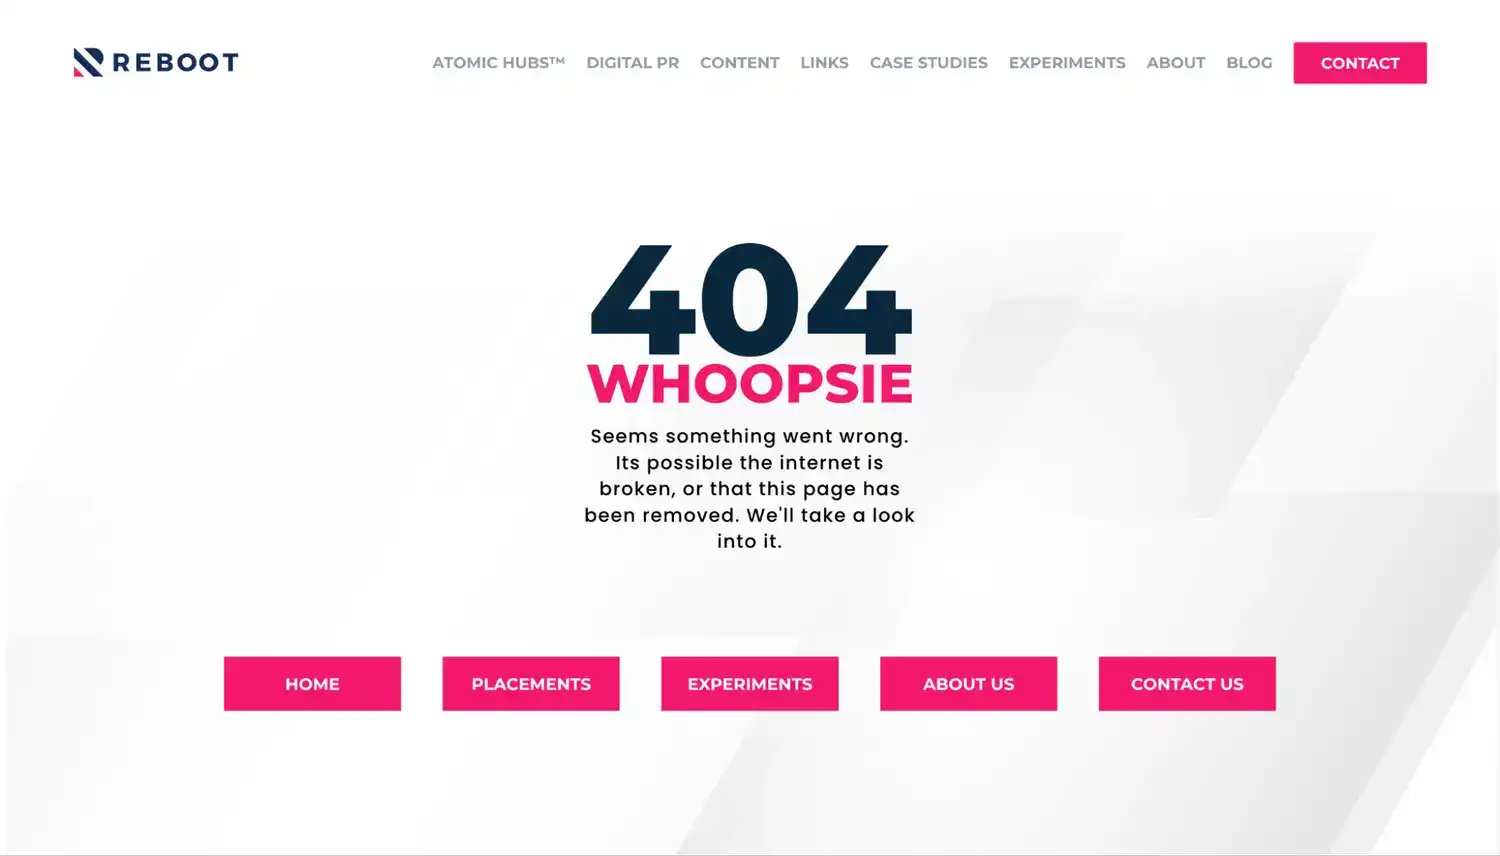 Example of a 404 page on the Reboot site.